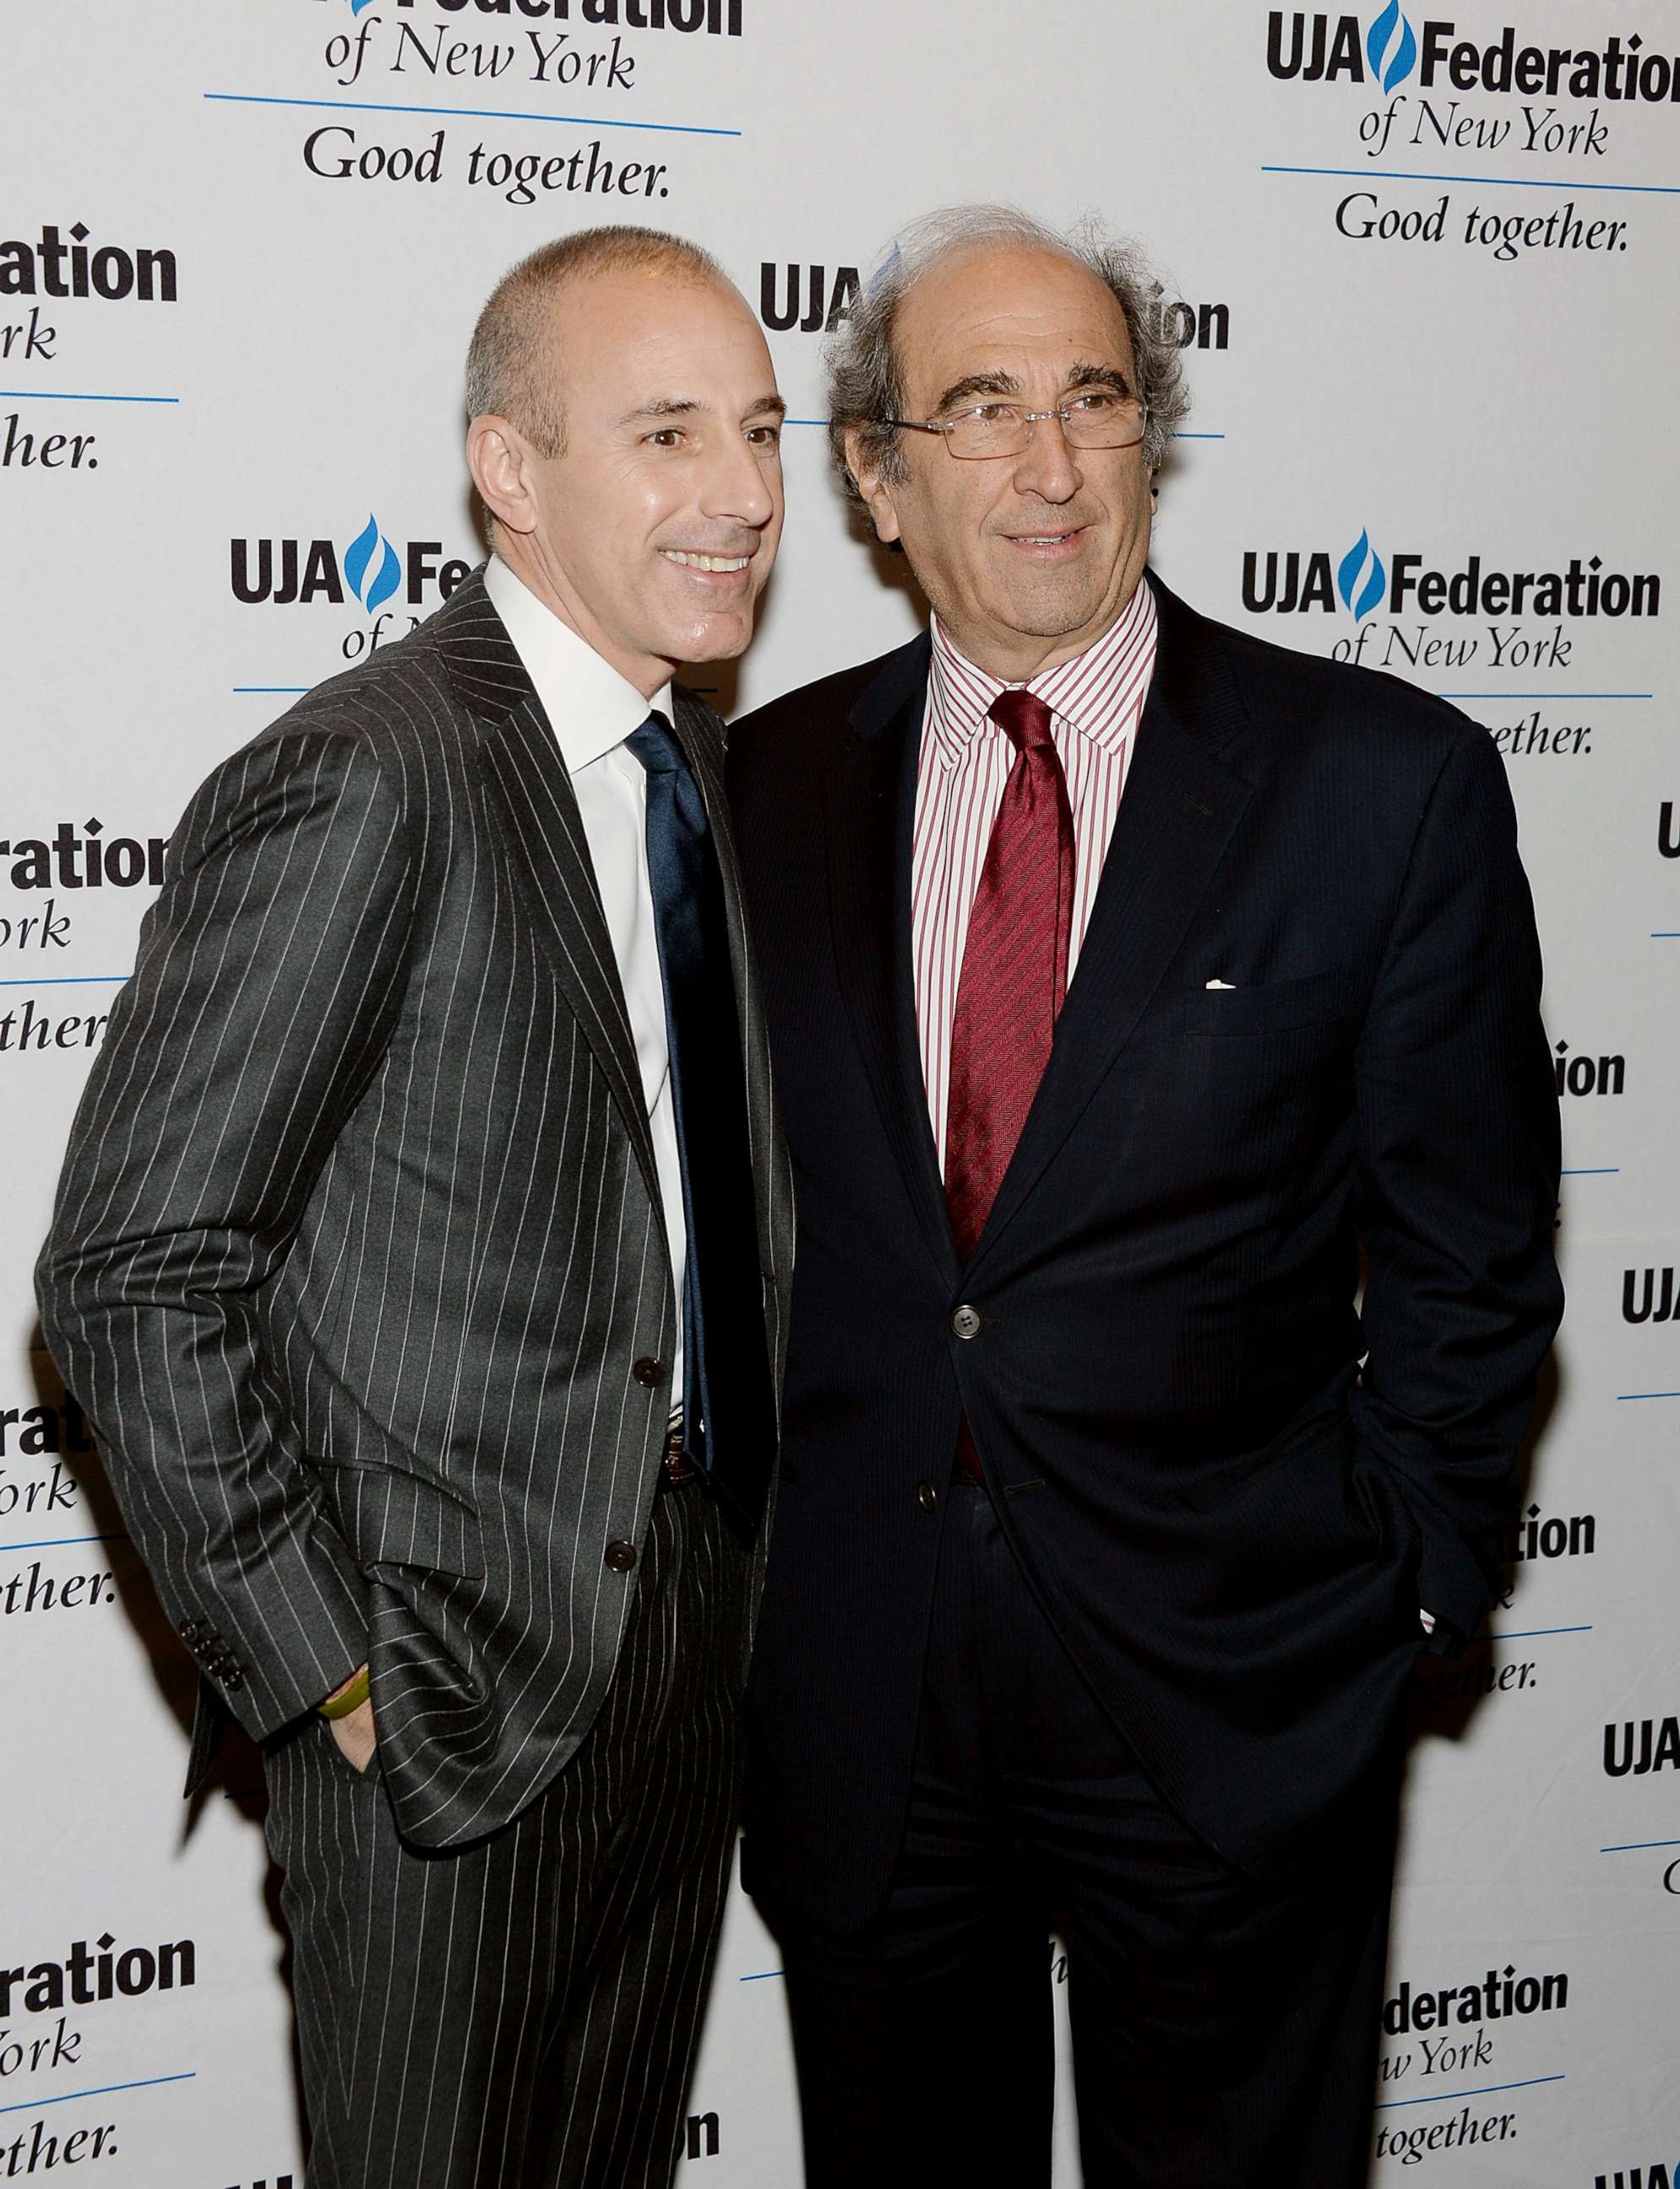 PHOTO:Matt Lauer and Andy Lack attend UJA-Federation Of New York Broadcast, Cable And Film Award Celebration at The Edison Ballroom in this April 9, 2013 file photo in New York City.